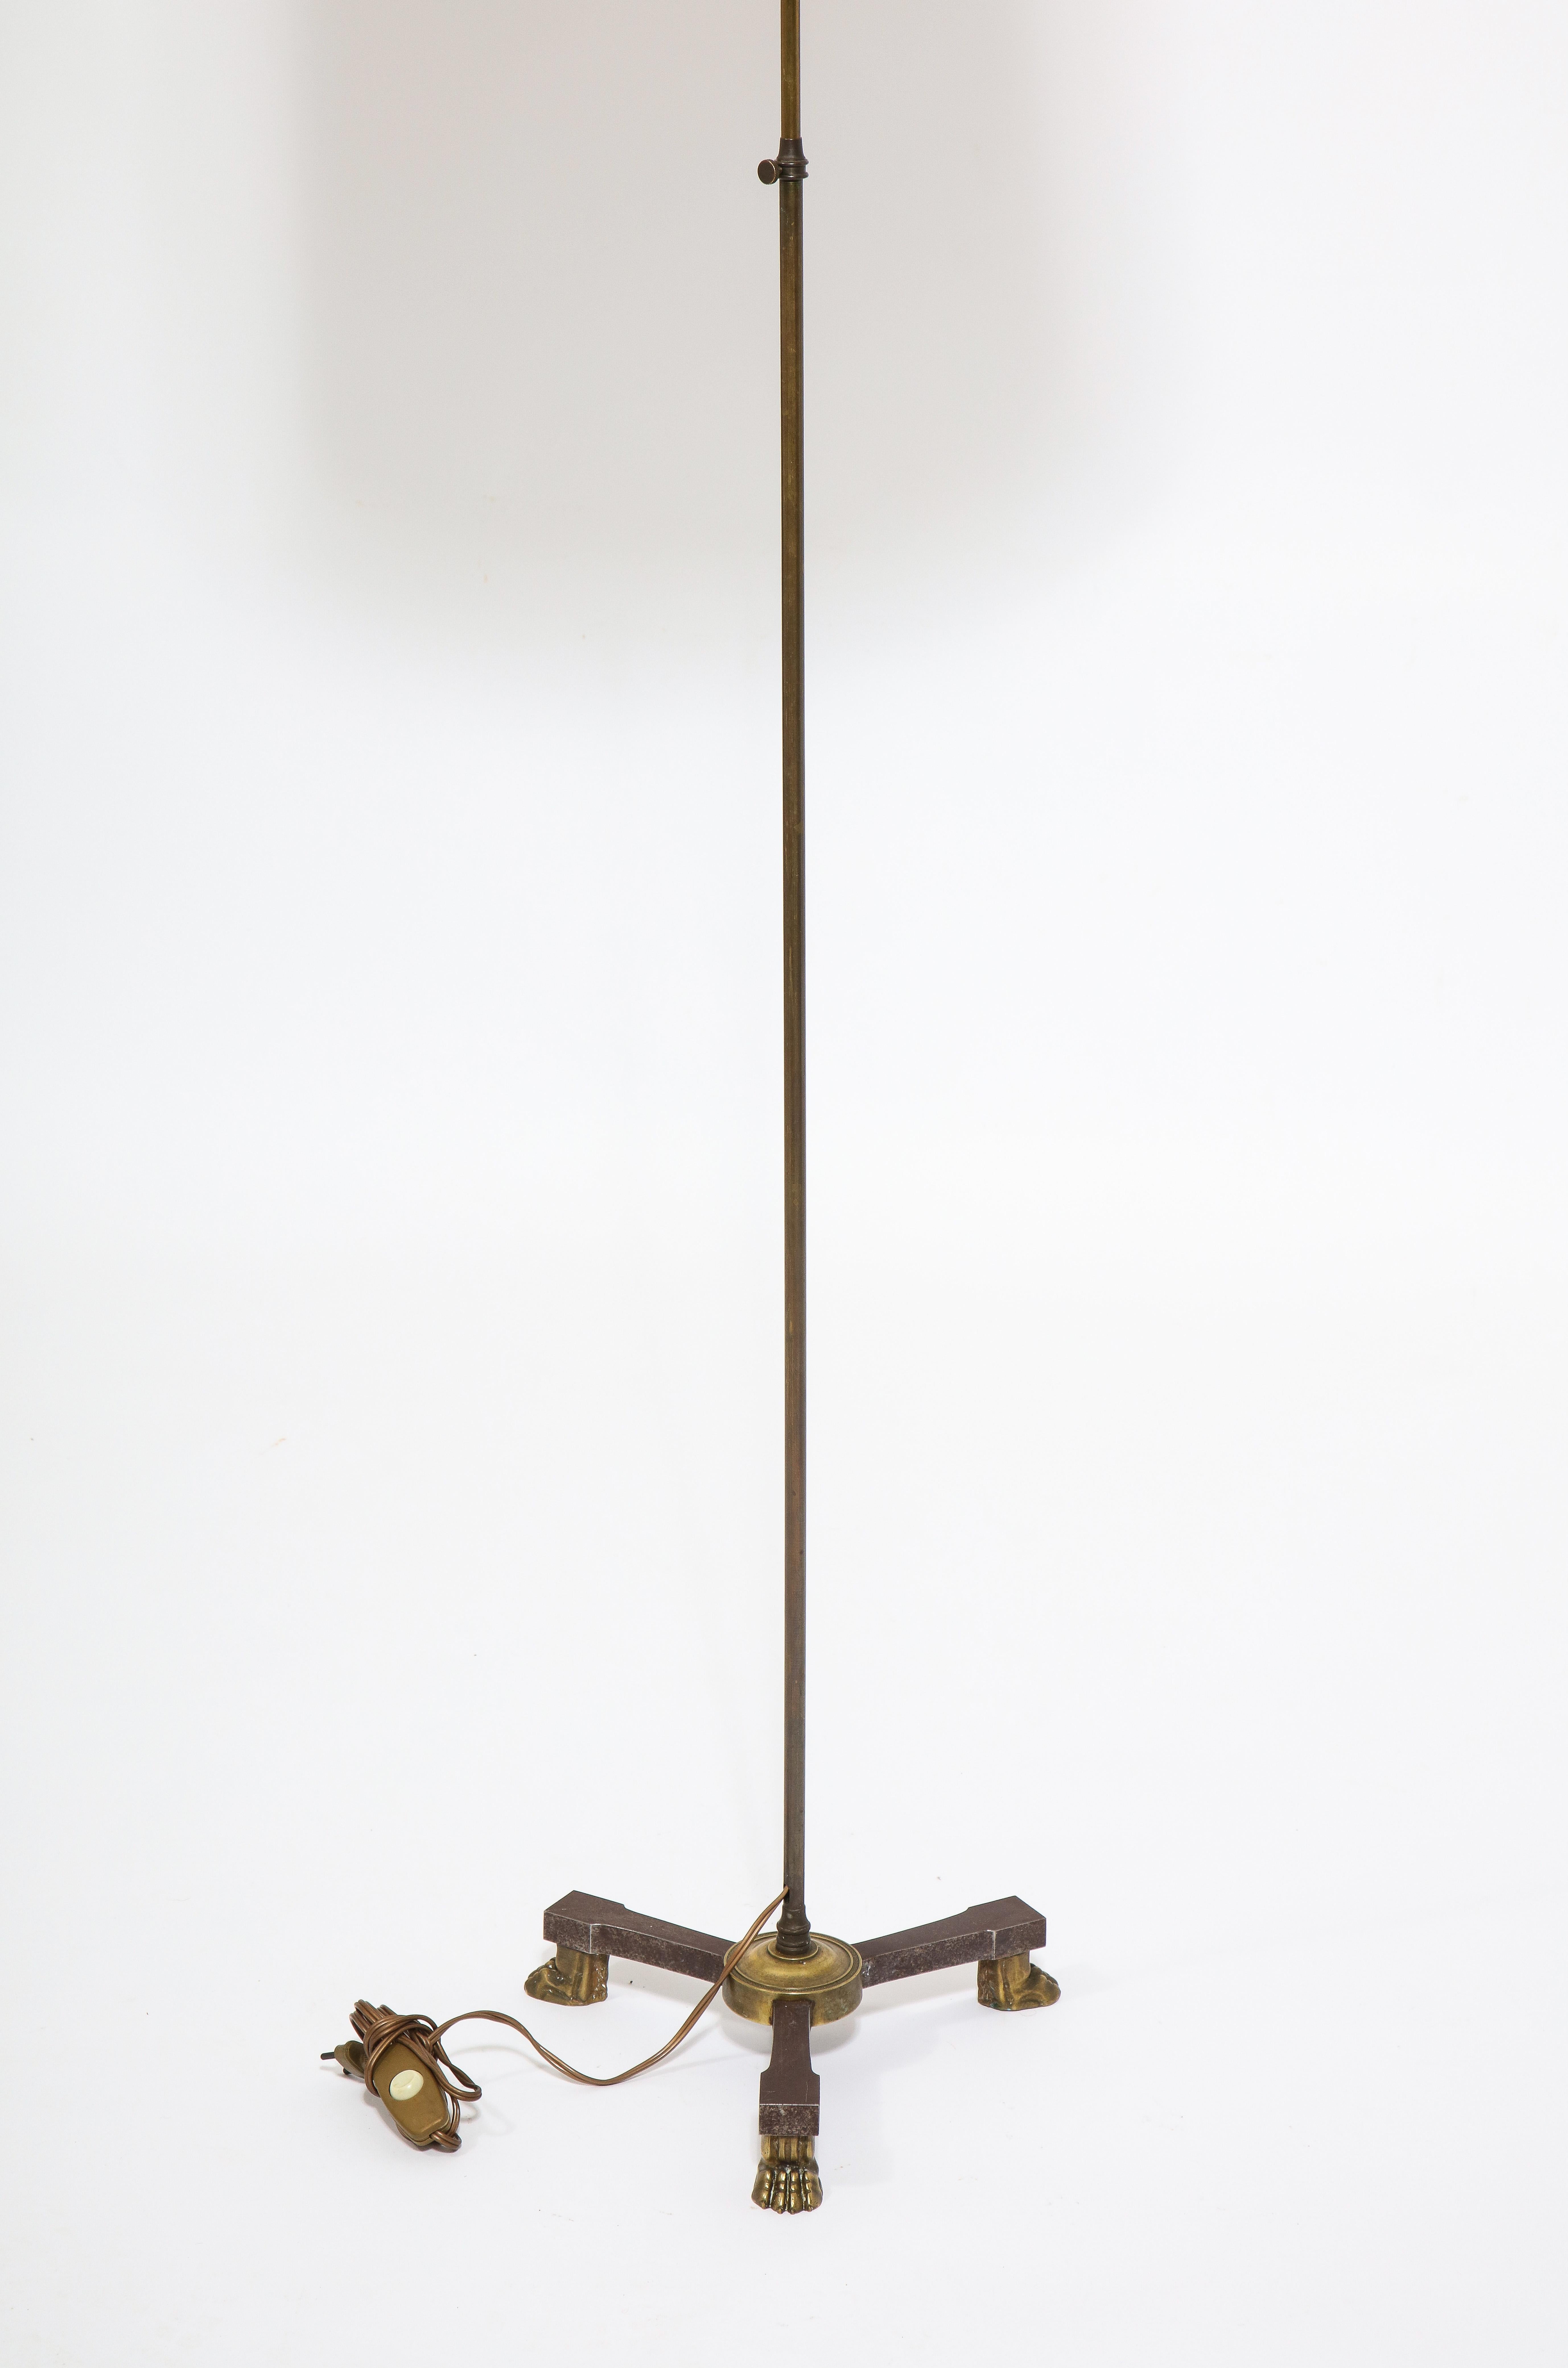 Lion Feet Bronze Neo Classical Floor Lamp Attributed to Arbus, France 1940's For Sale 4